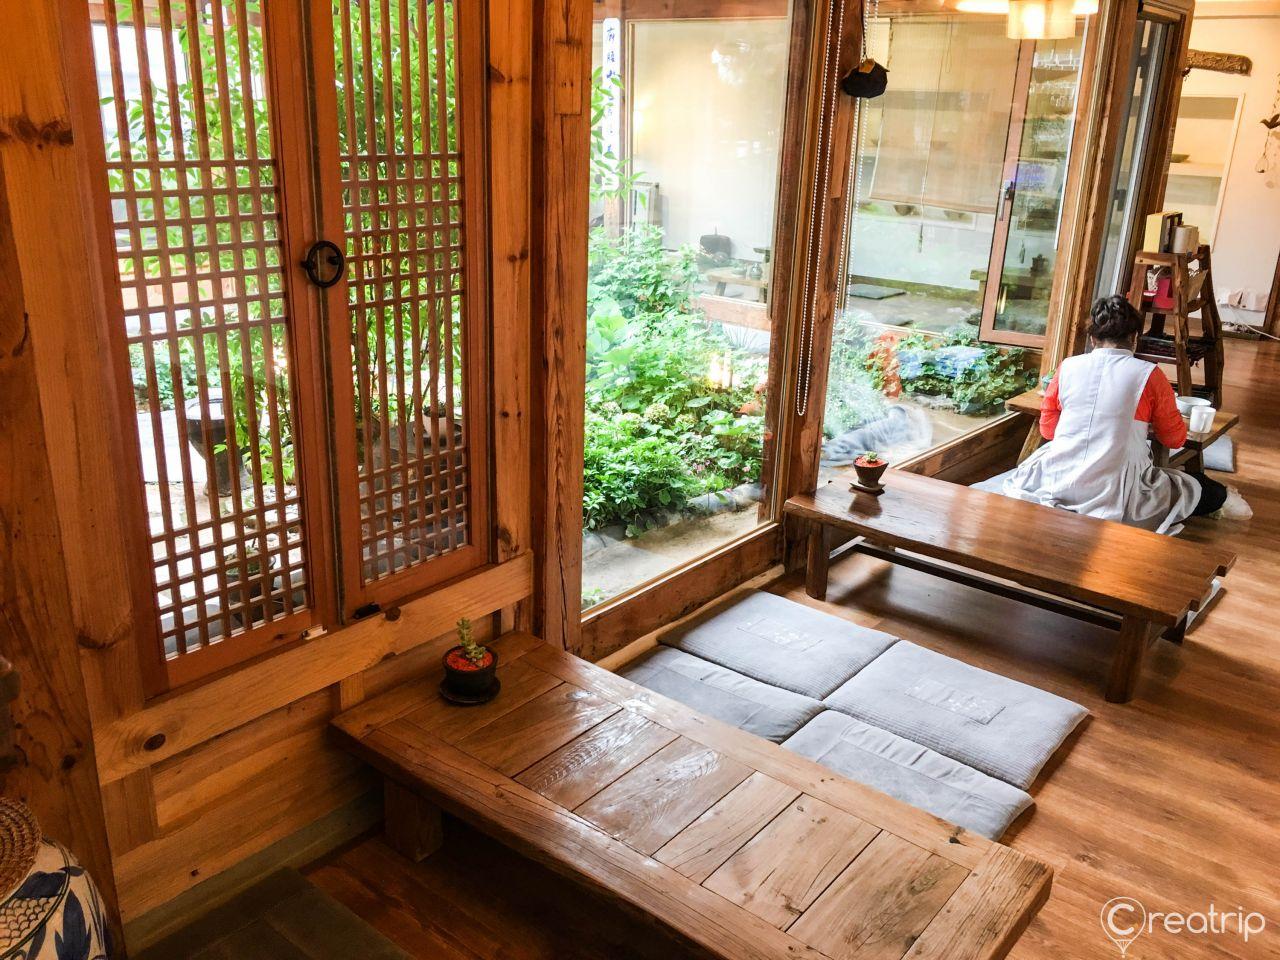 Interior view of a room in Korea with wooden flooring, table, plants and a window with a view.